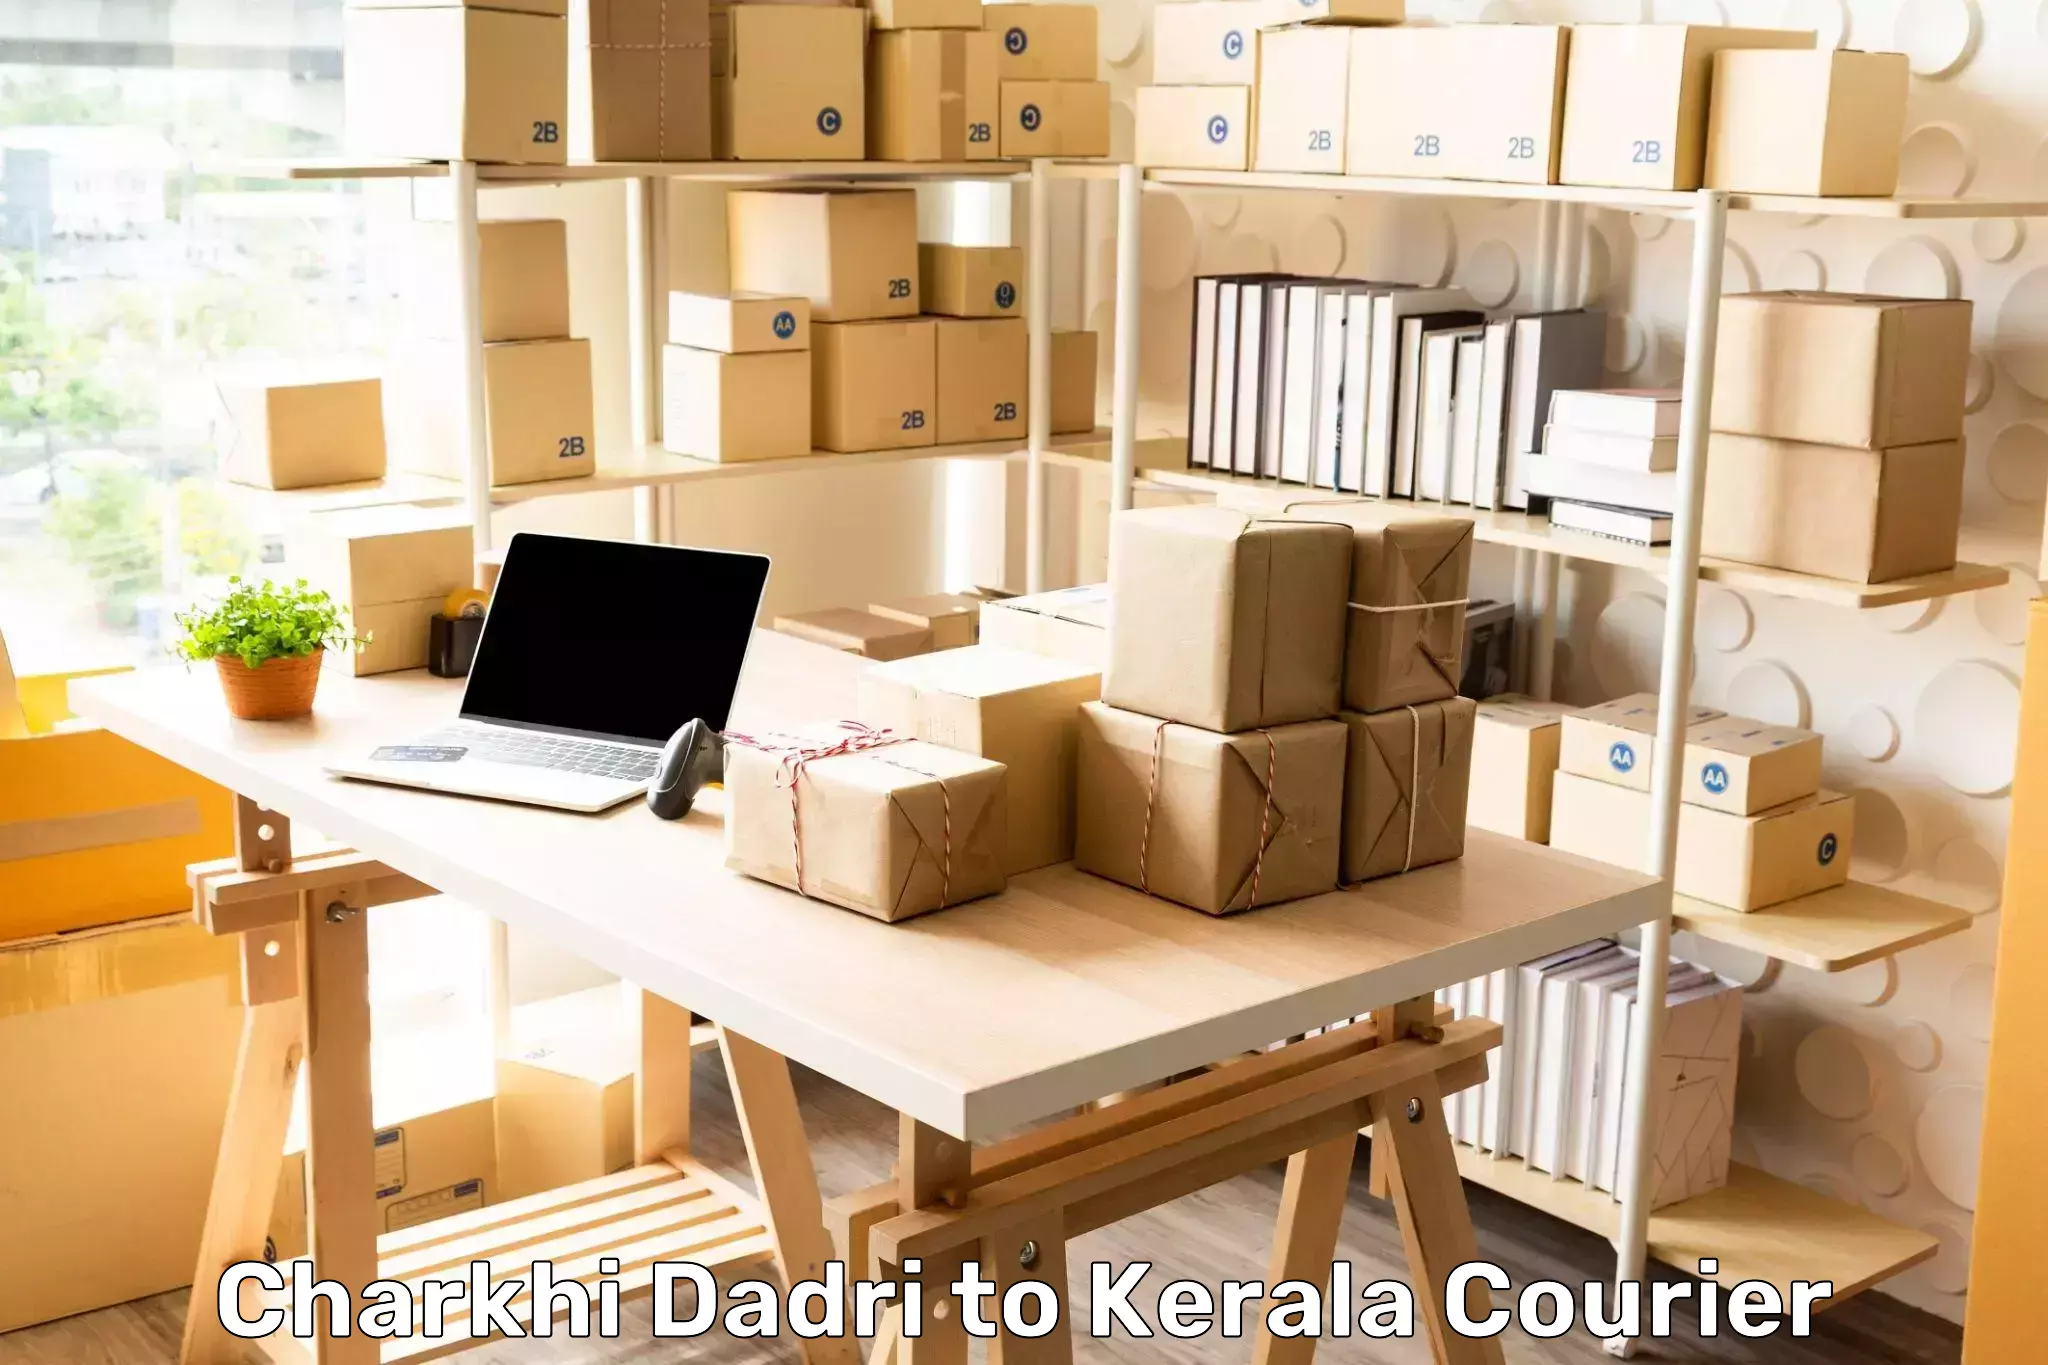 Customer-oriented courier services Charkhi Dadri to Ernakulam